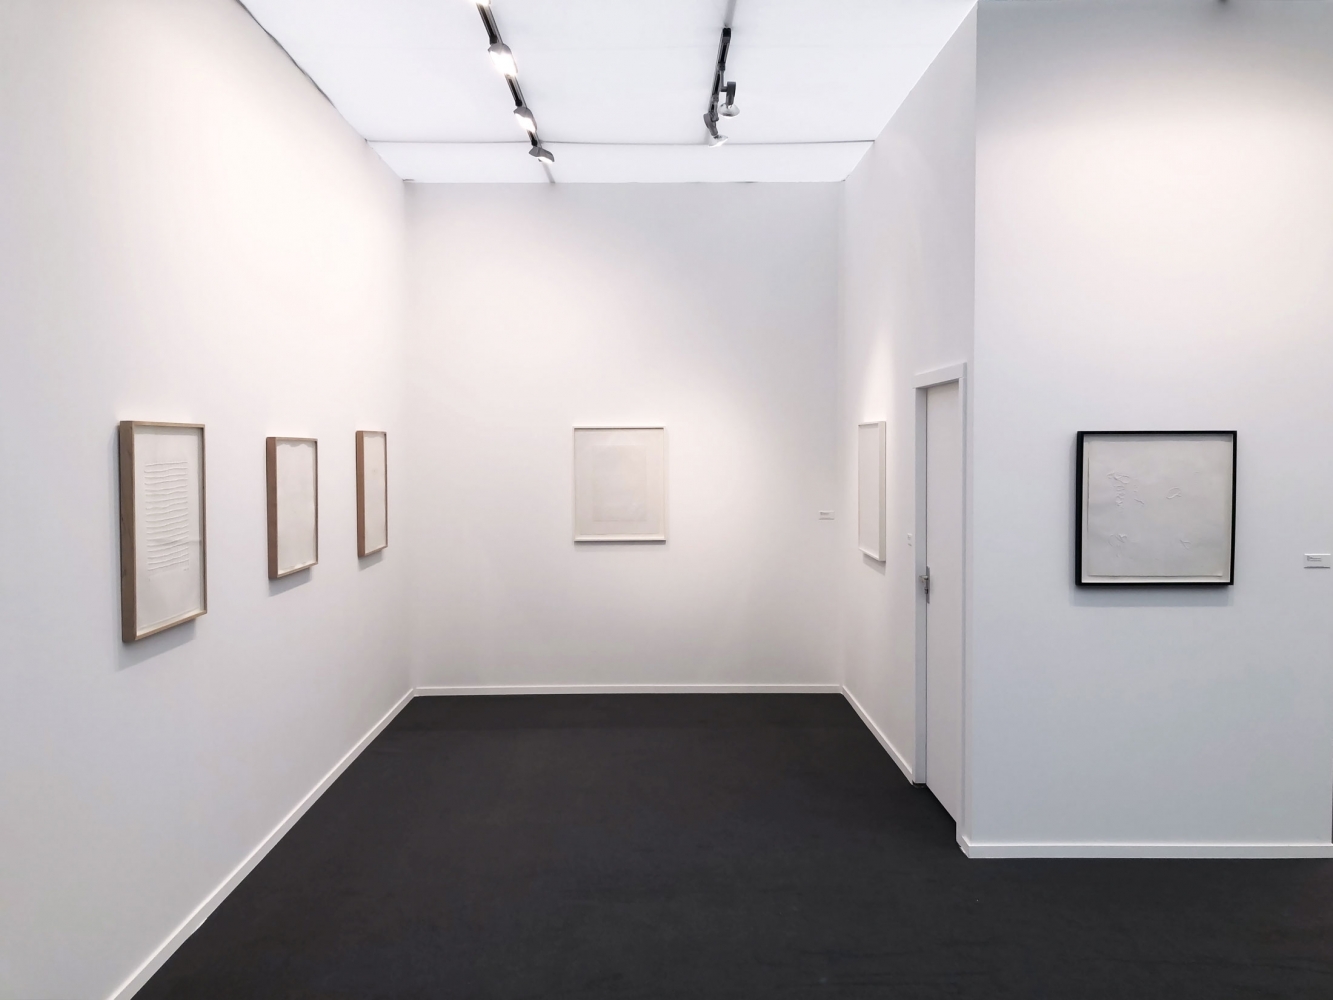 Luhring Augustine

Frieze Masters, Stand 306

Installation view

2018